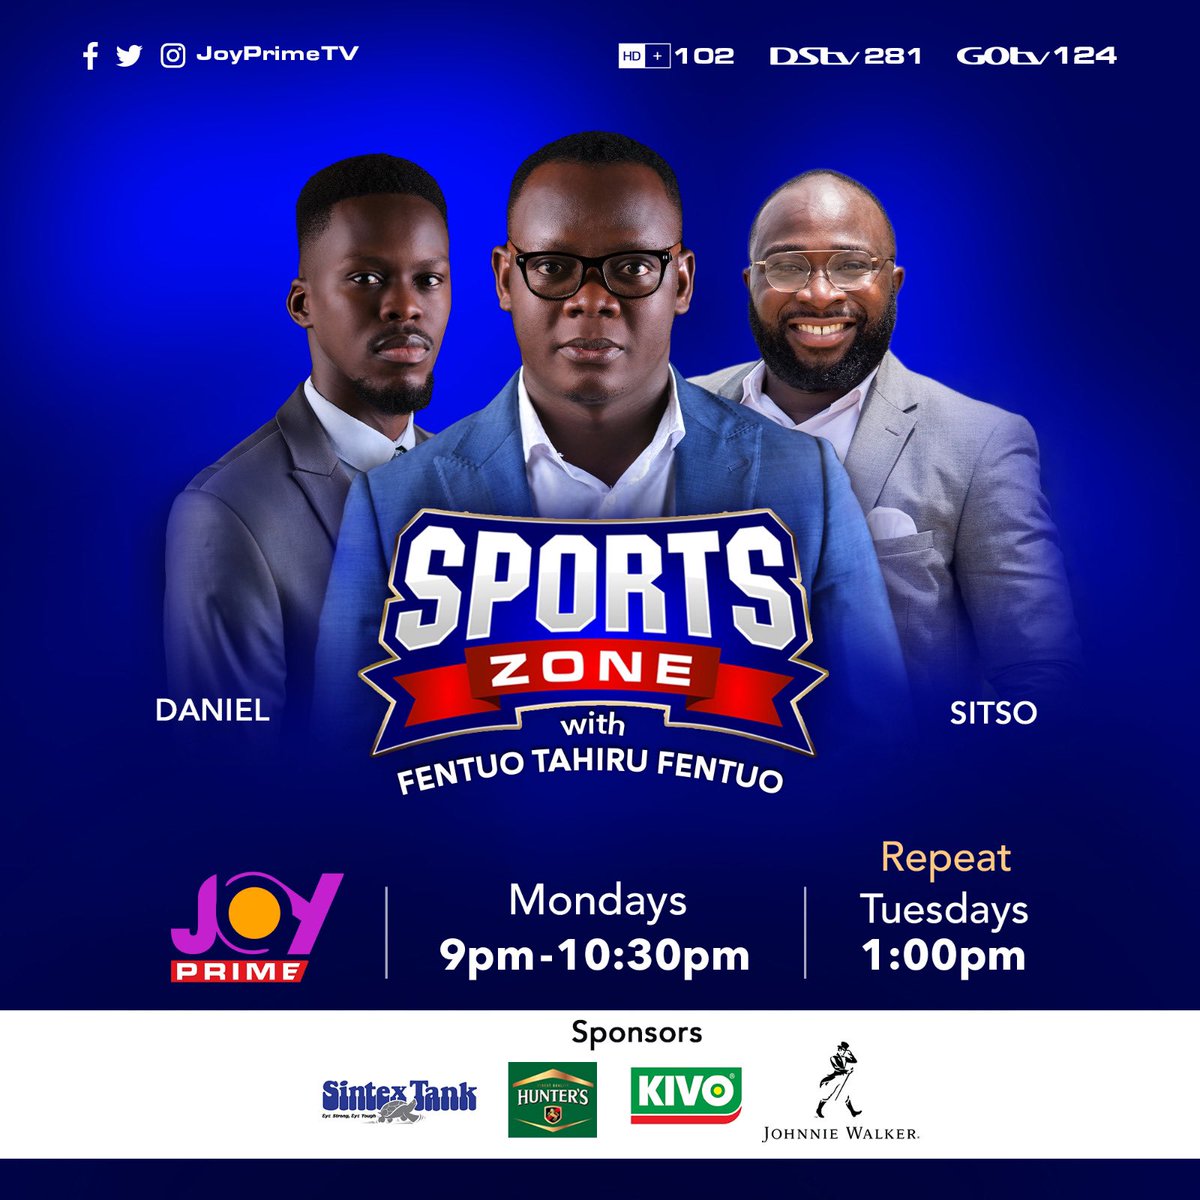 Somebody say the new graphic dey look some prophetic all night service promo with General Overseer and two visiting Pastors😂😂  😅 #SportsZone